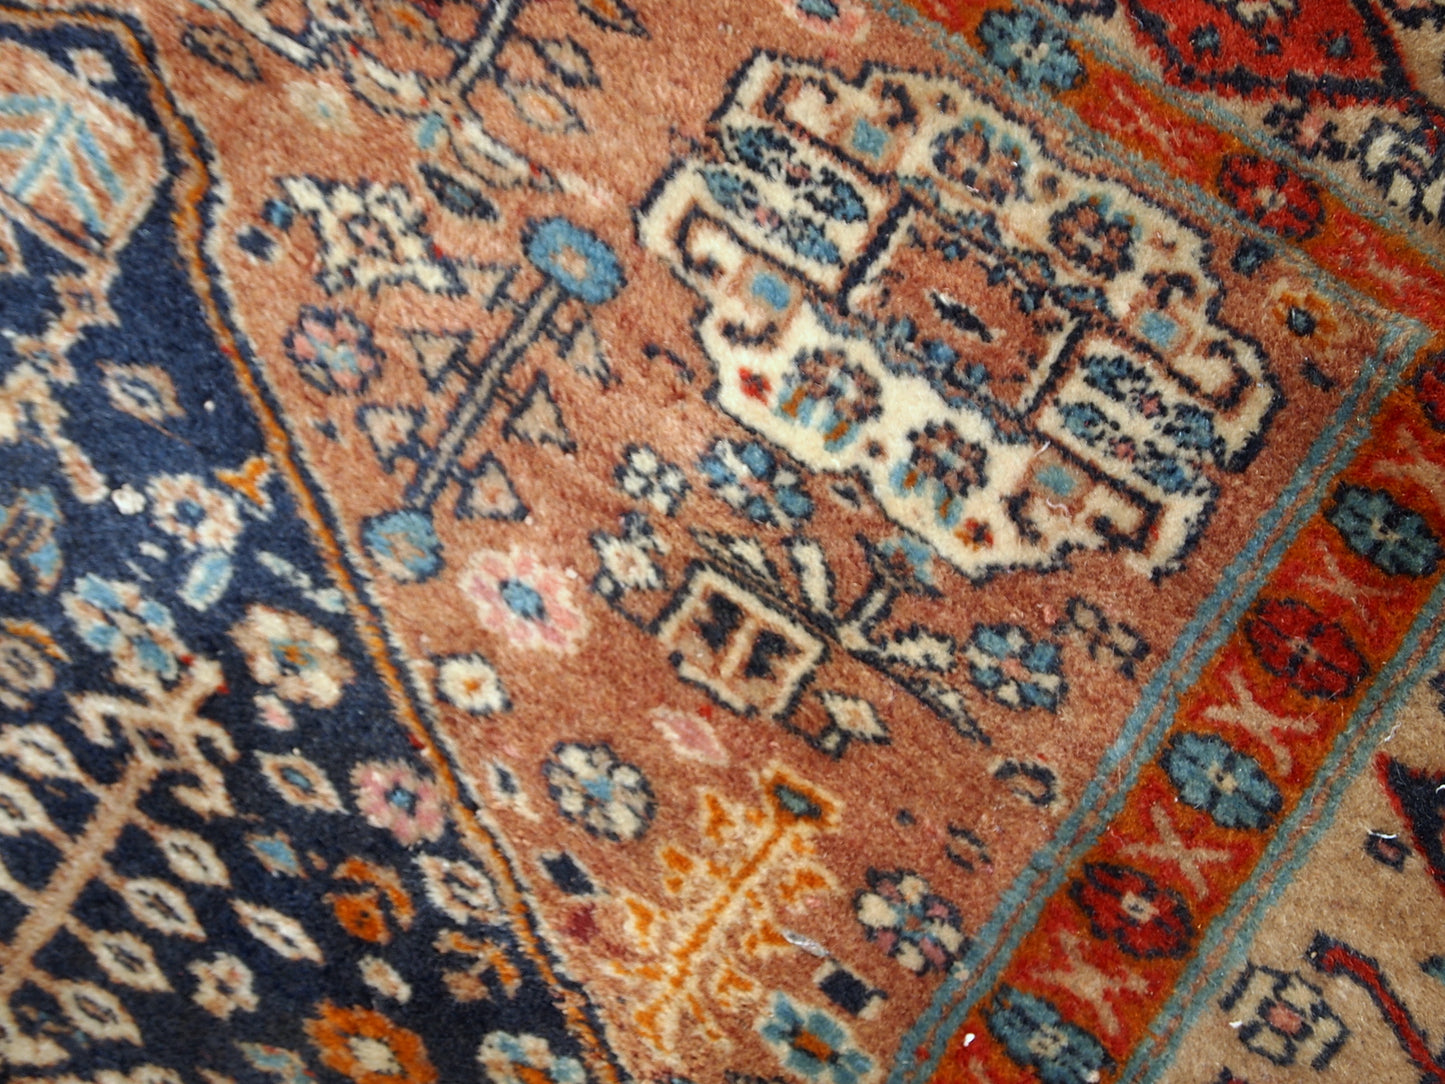 Handmade antique Baluch rug from Central Asia in original condition, it has some age wear. The rug is from the beginning of 20th century.